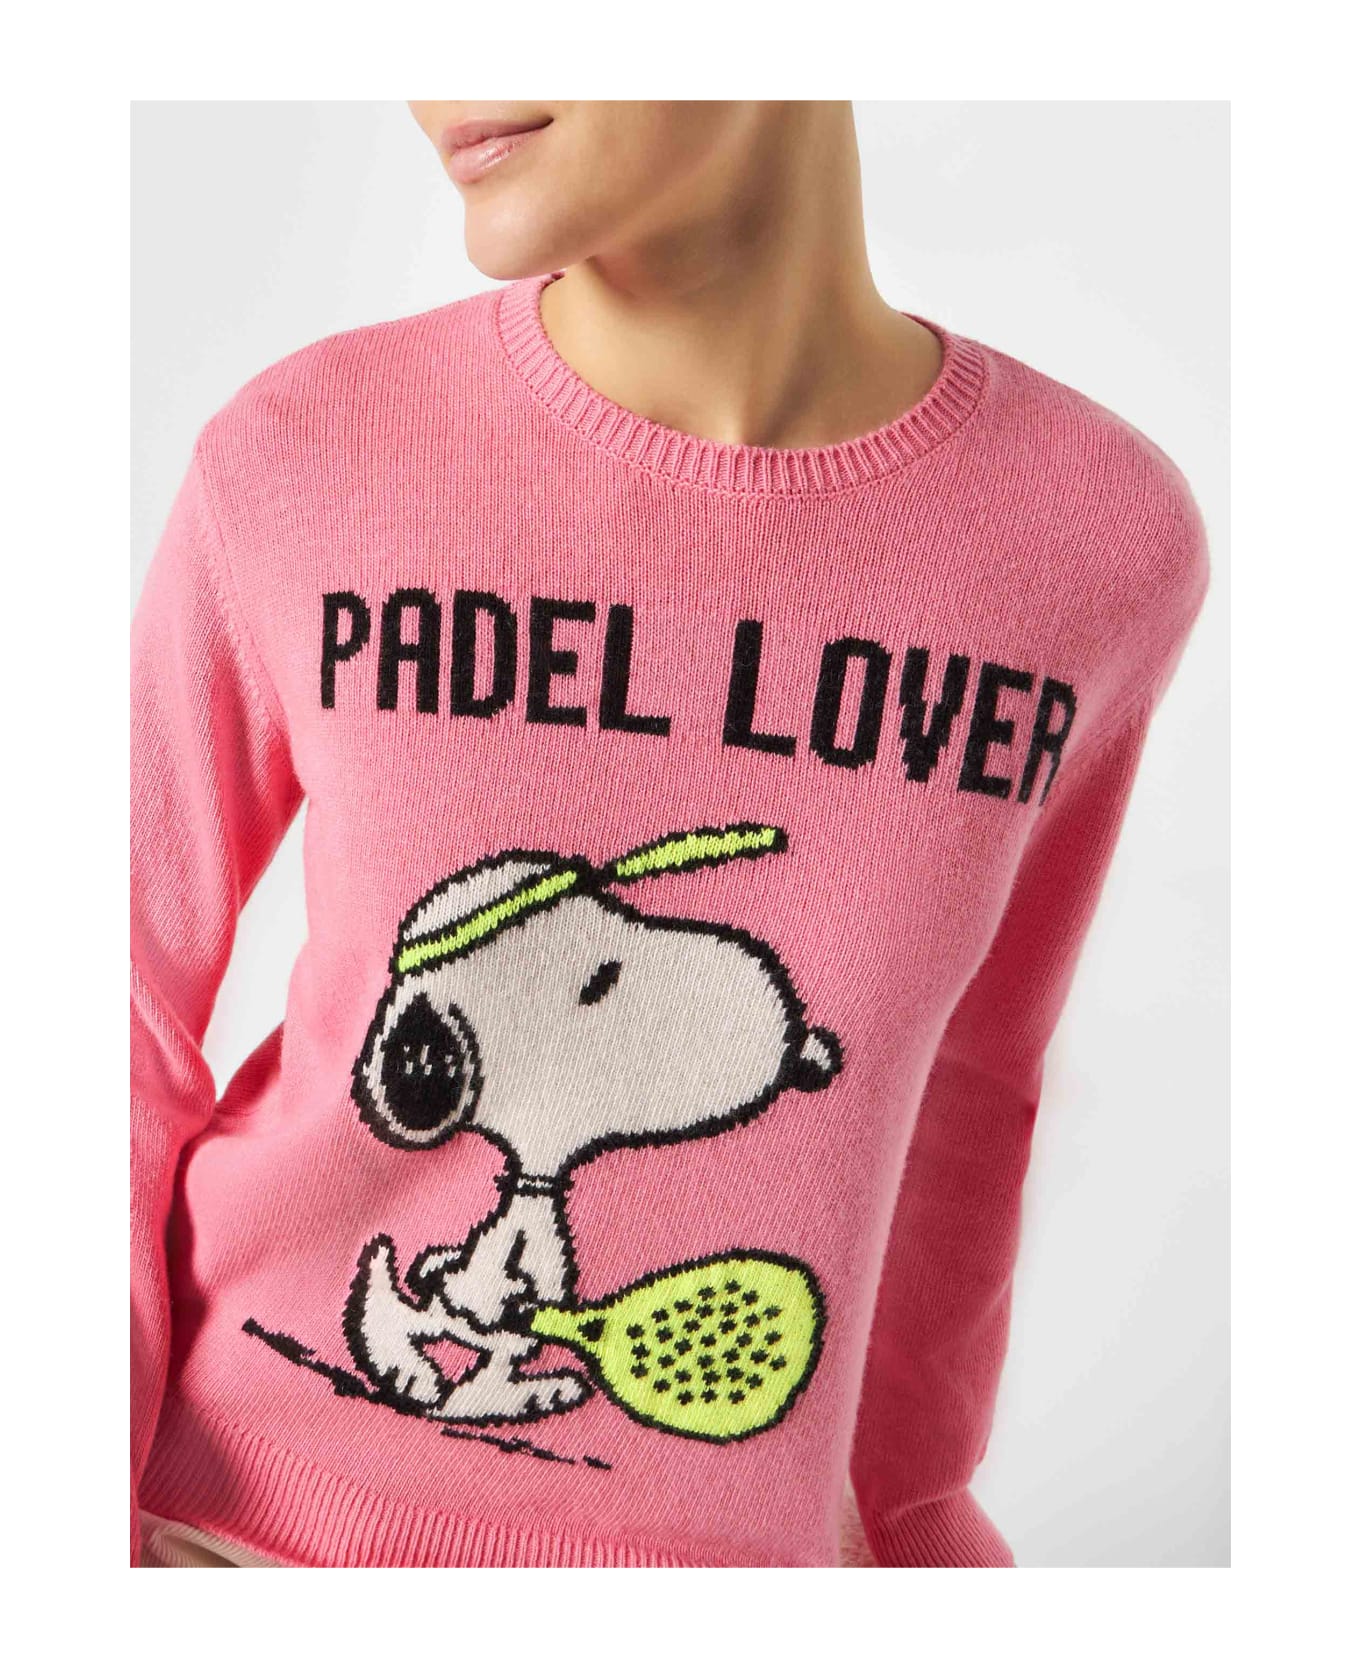 MC2 Saint Barth Woman Sweater With Snoopy Print | Peanuts Special Edition - PINK